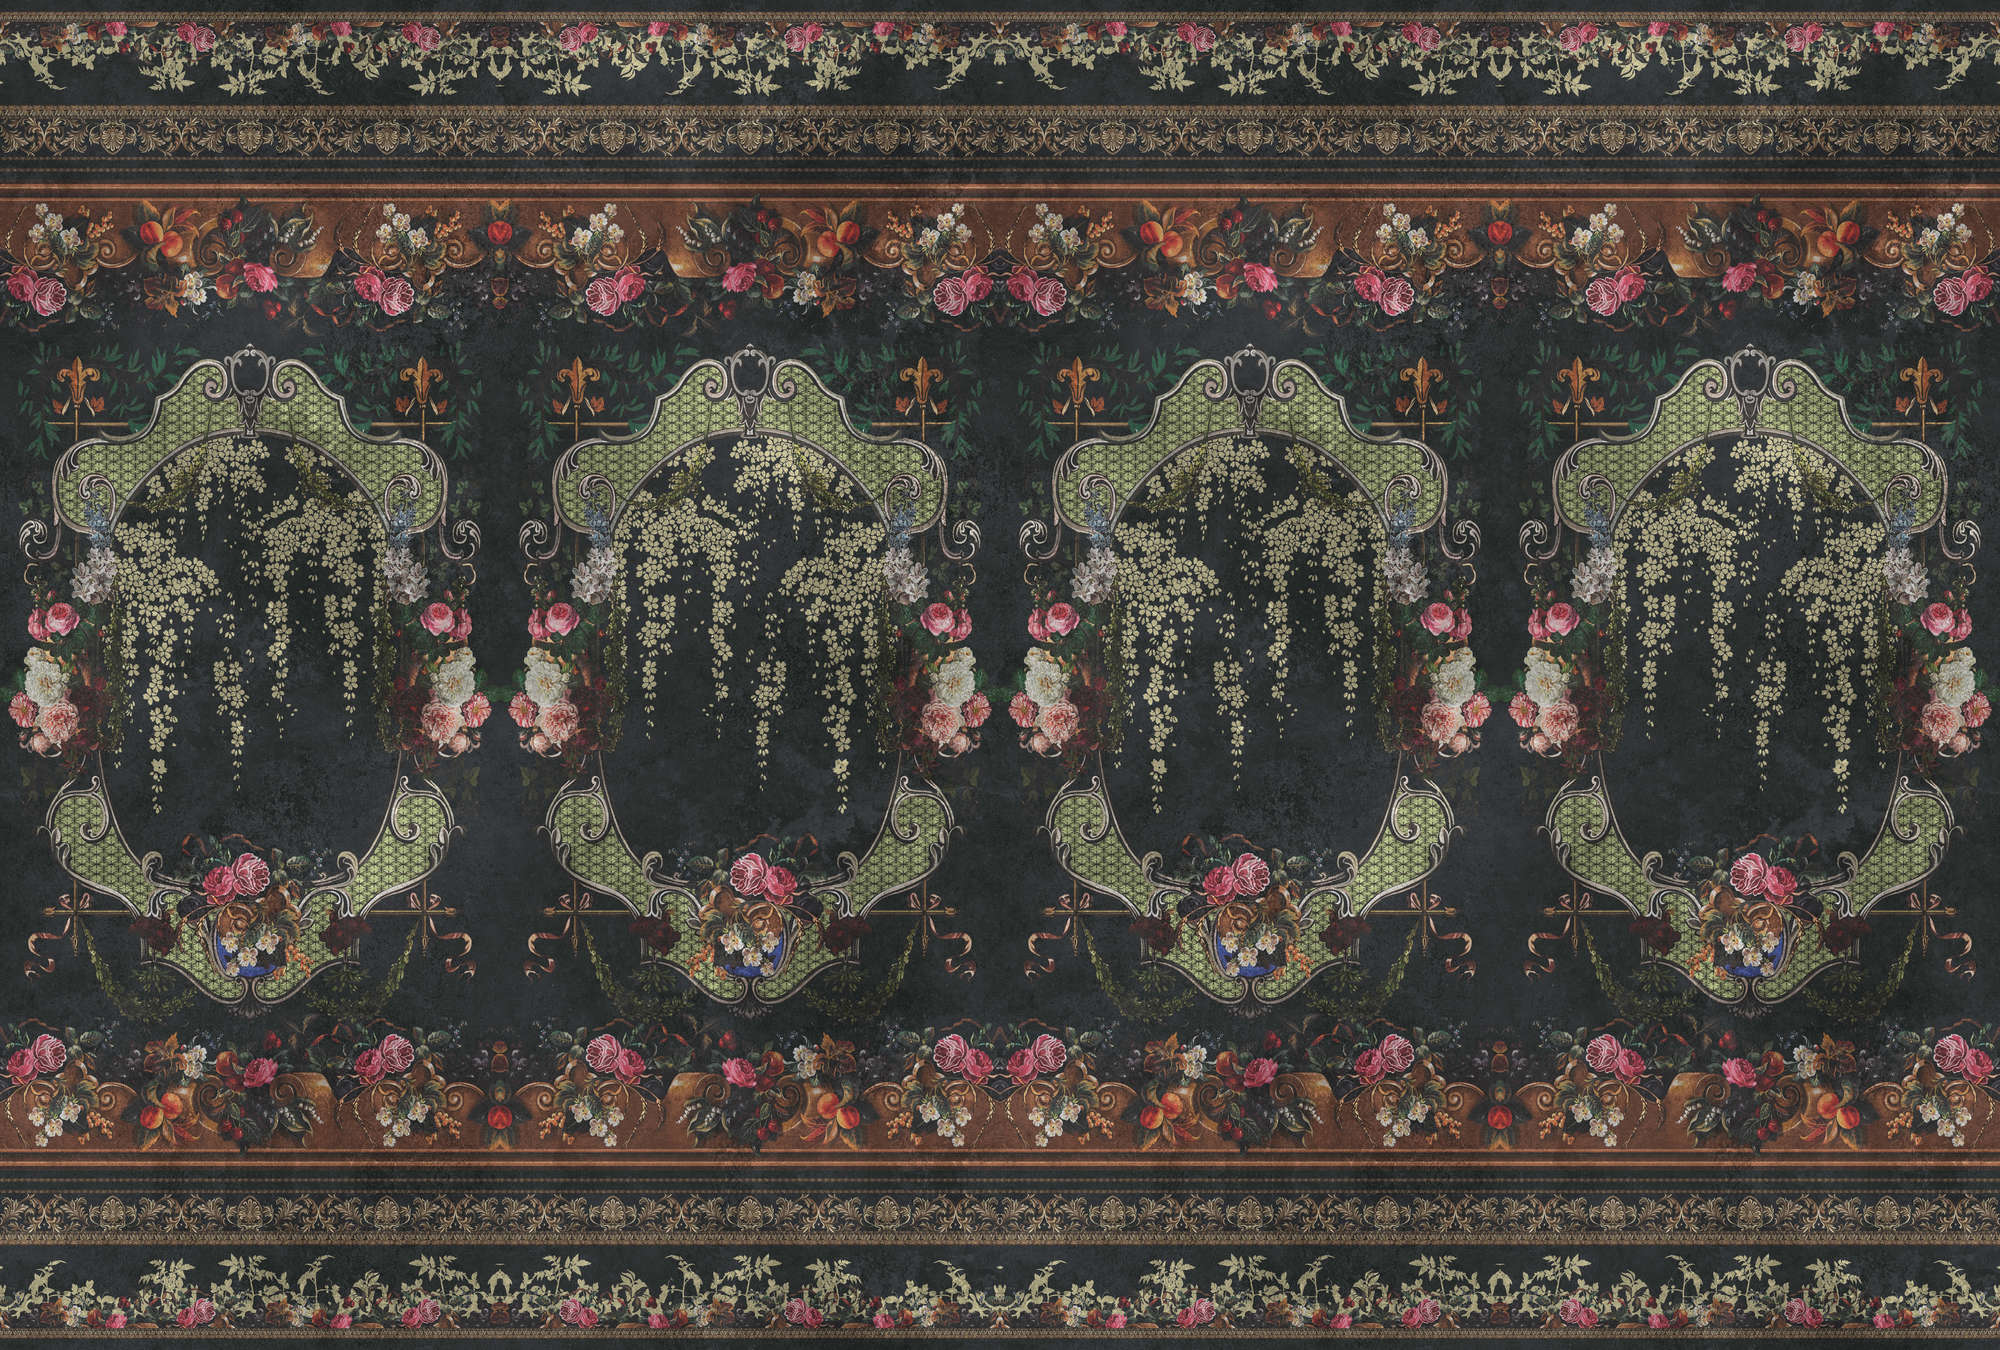             Photo wallpaper »babette« - Ornamental panelling with floral design on vintage plaster texture - red, dark blue | Smooth, slightly shiny premium non-woven fabric
        